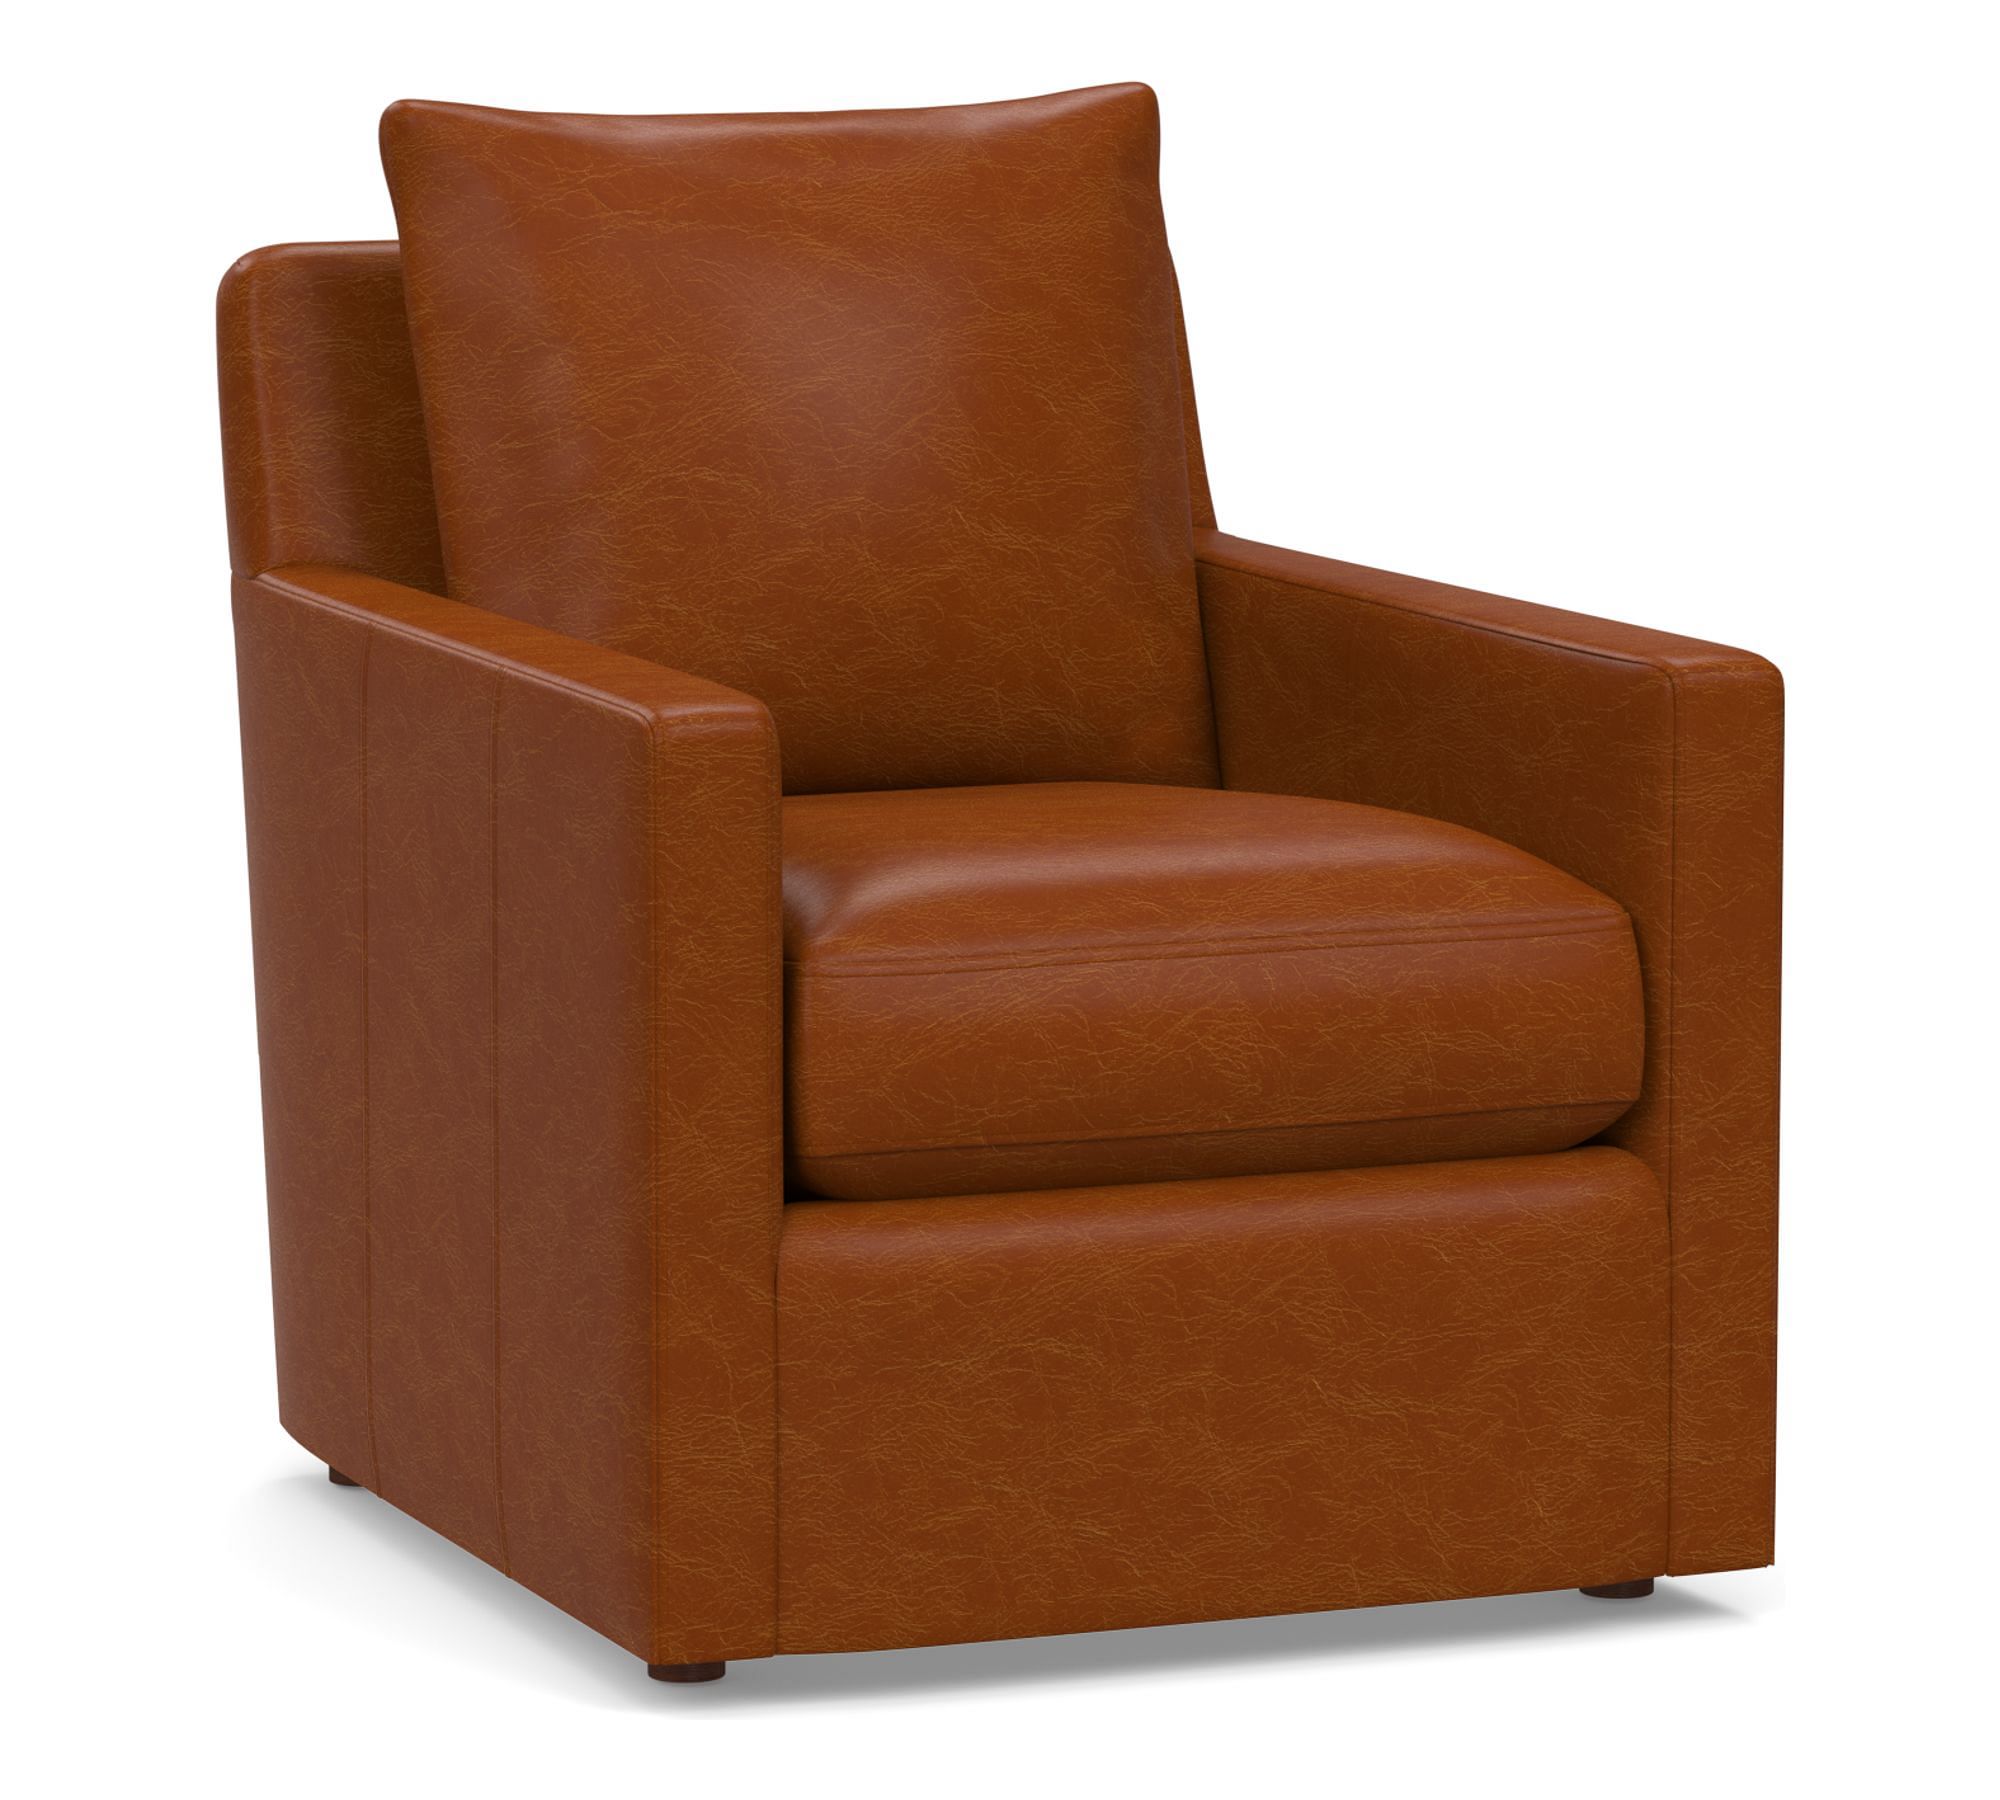 Ayden Square Arm Leather Chair